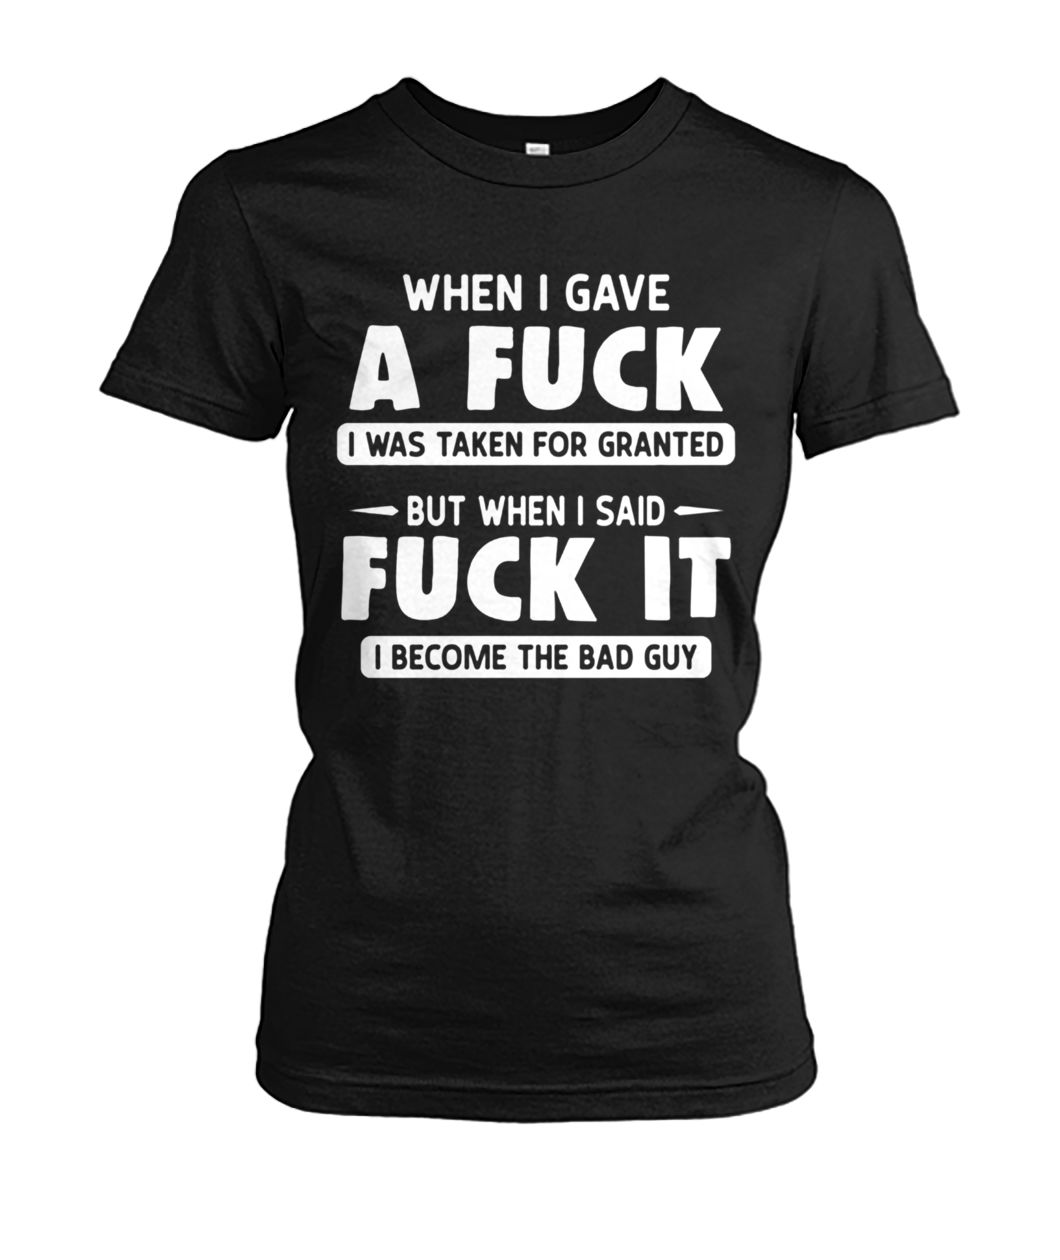 When I gave a fuck I was taken for granted but when I said fuck it I become the bad guy women's crew tee